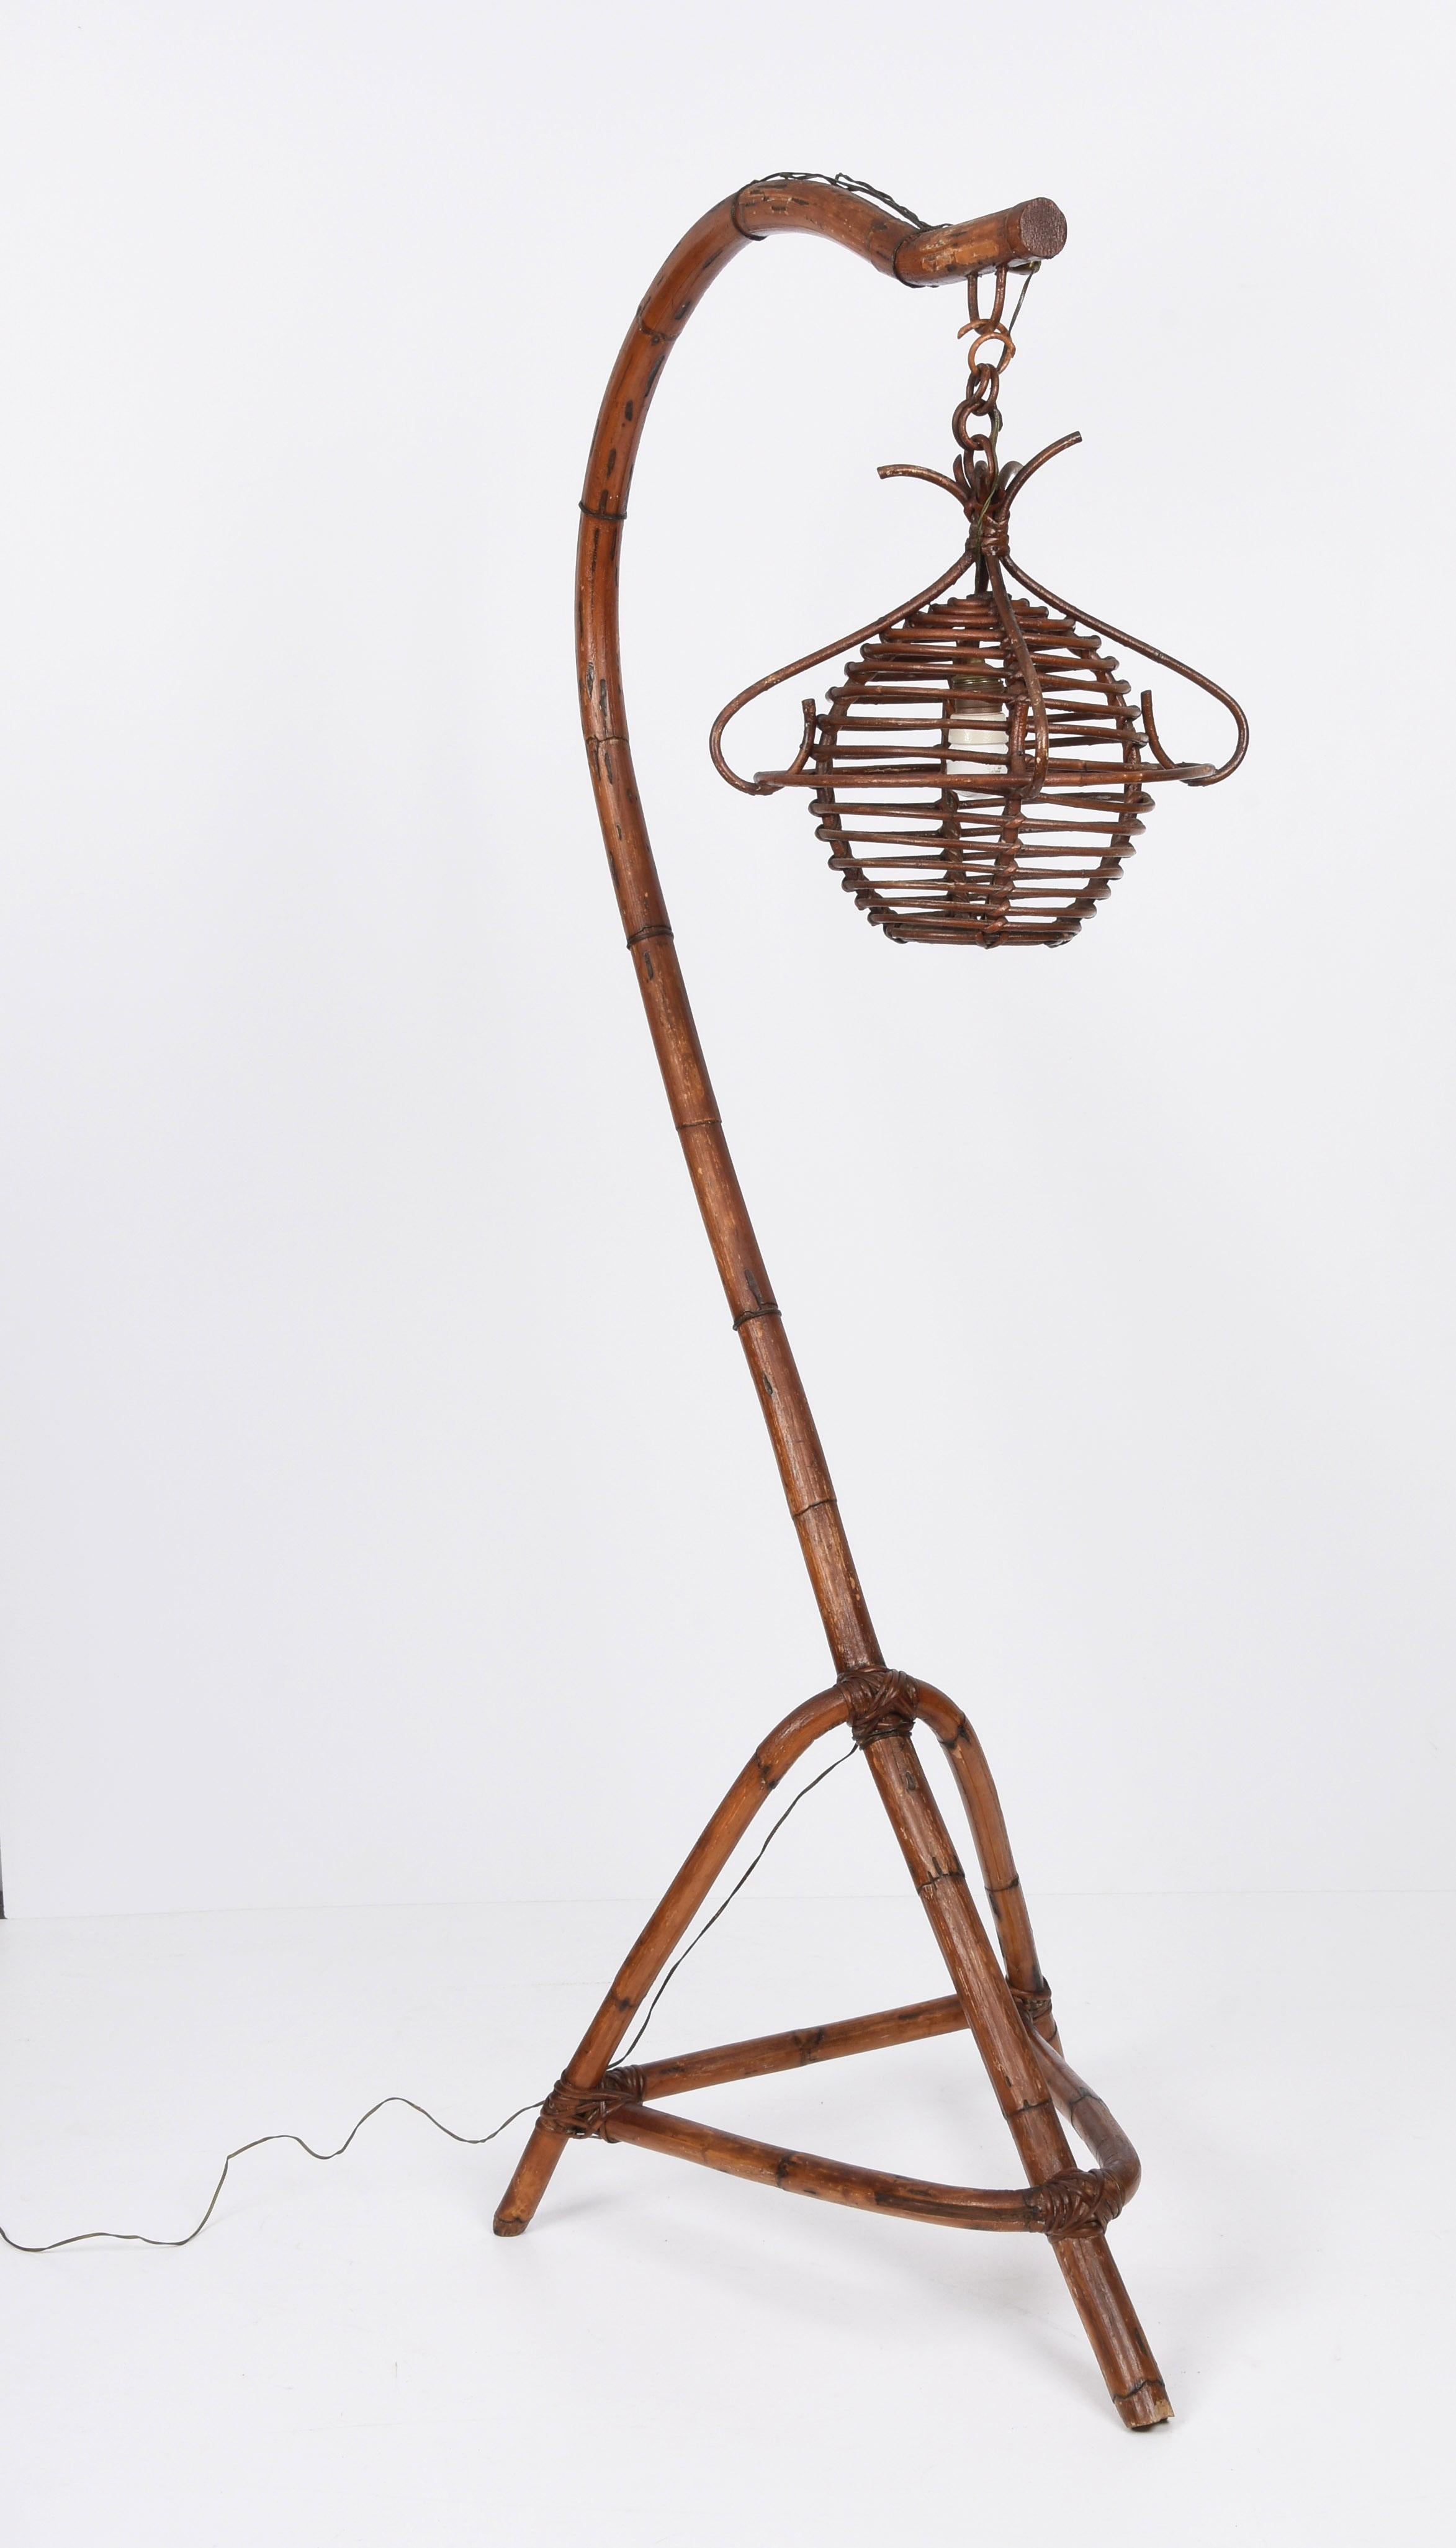 Mid-20th Century Midcentury Bamboo and Rattan Italian Floor Lamp with Tripod Base, 1950s For Sale